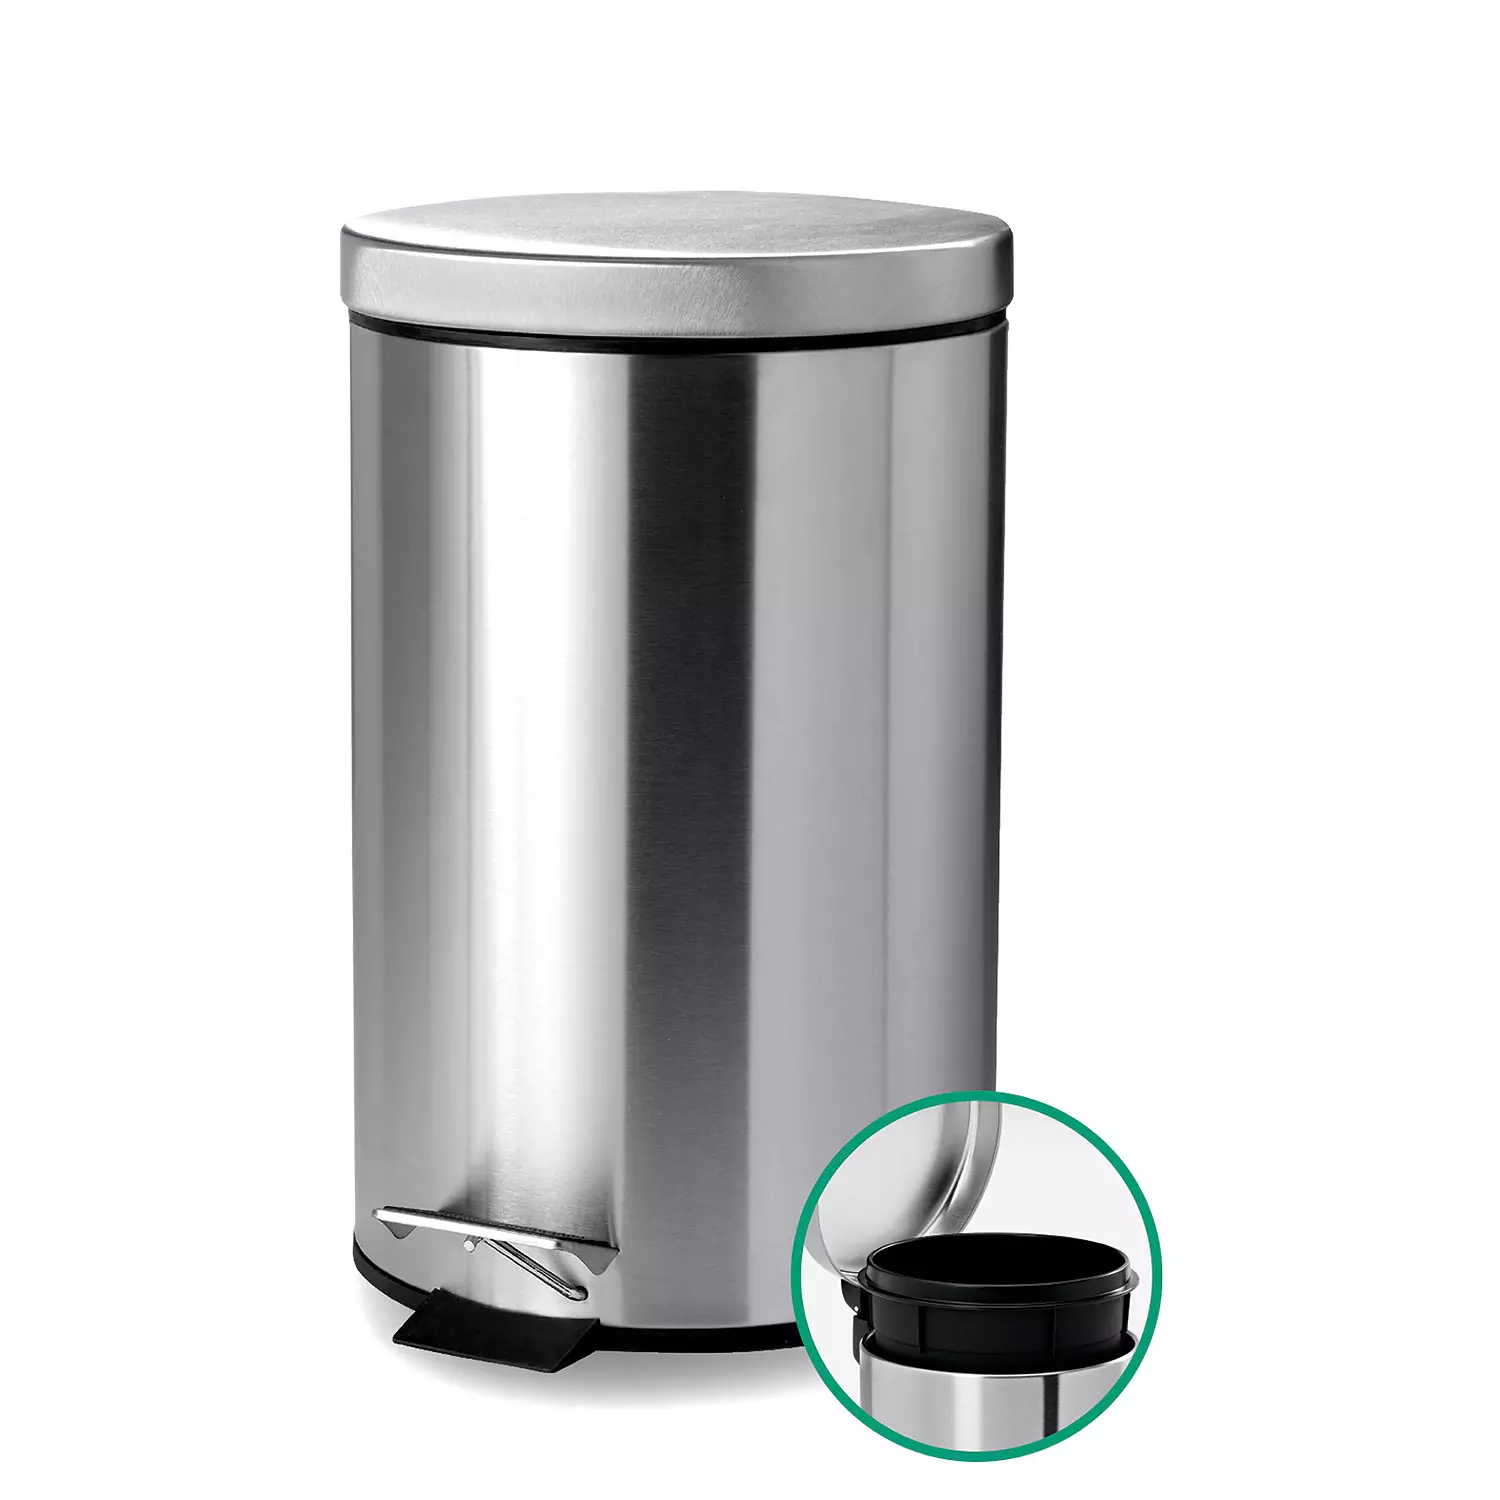 Stainless steel step pedal trash can, 3L